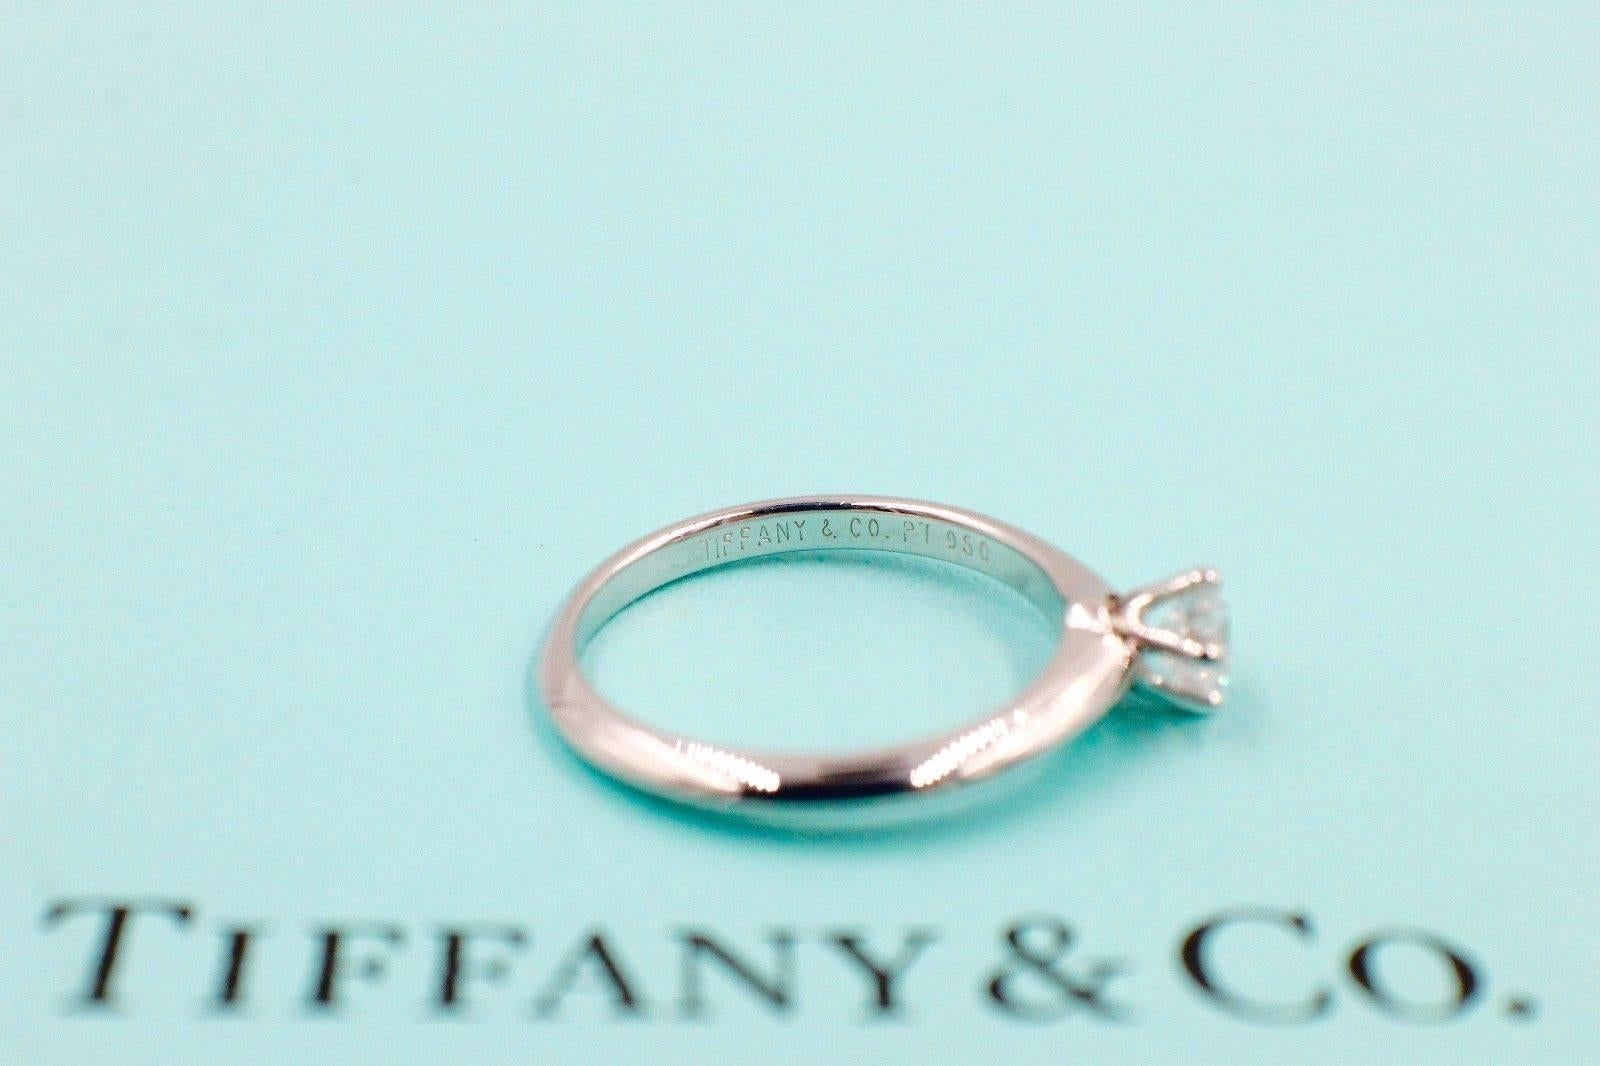 Tiffany & Co.
Style:  Solitaire Engagement Ring
Serial Number:  16428698
Metal:  Platinum PT950
Size:  4.25 - sizable 
Total Carat Weight:  0.28 TCW
Diamond Shape:  Round Brilliant Diamond 0.28 CTS
Diamond Color & Clarity:  D / IF
Hallmark: 